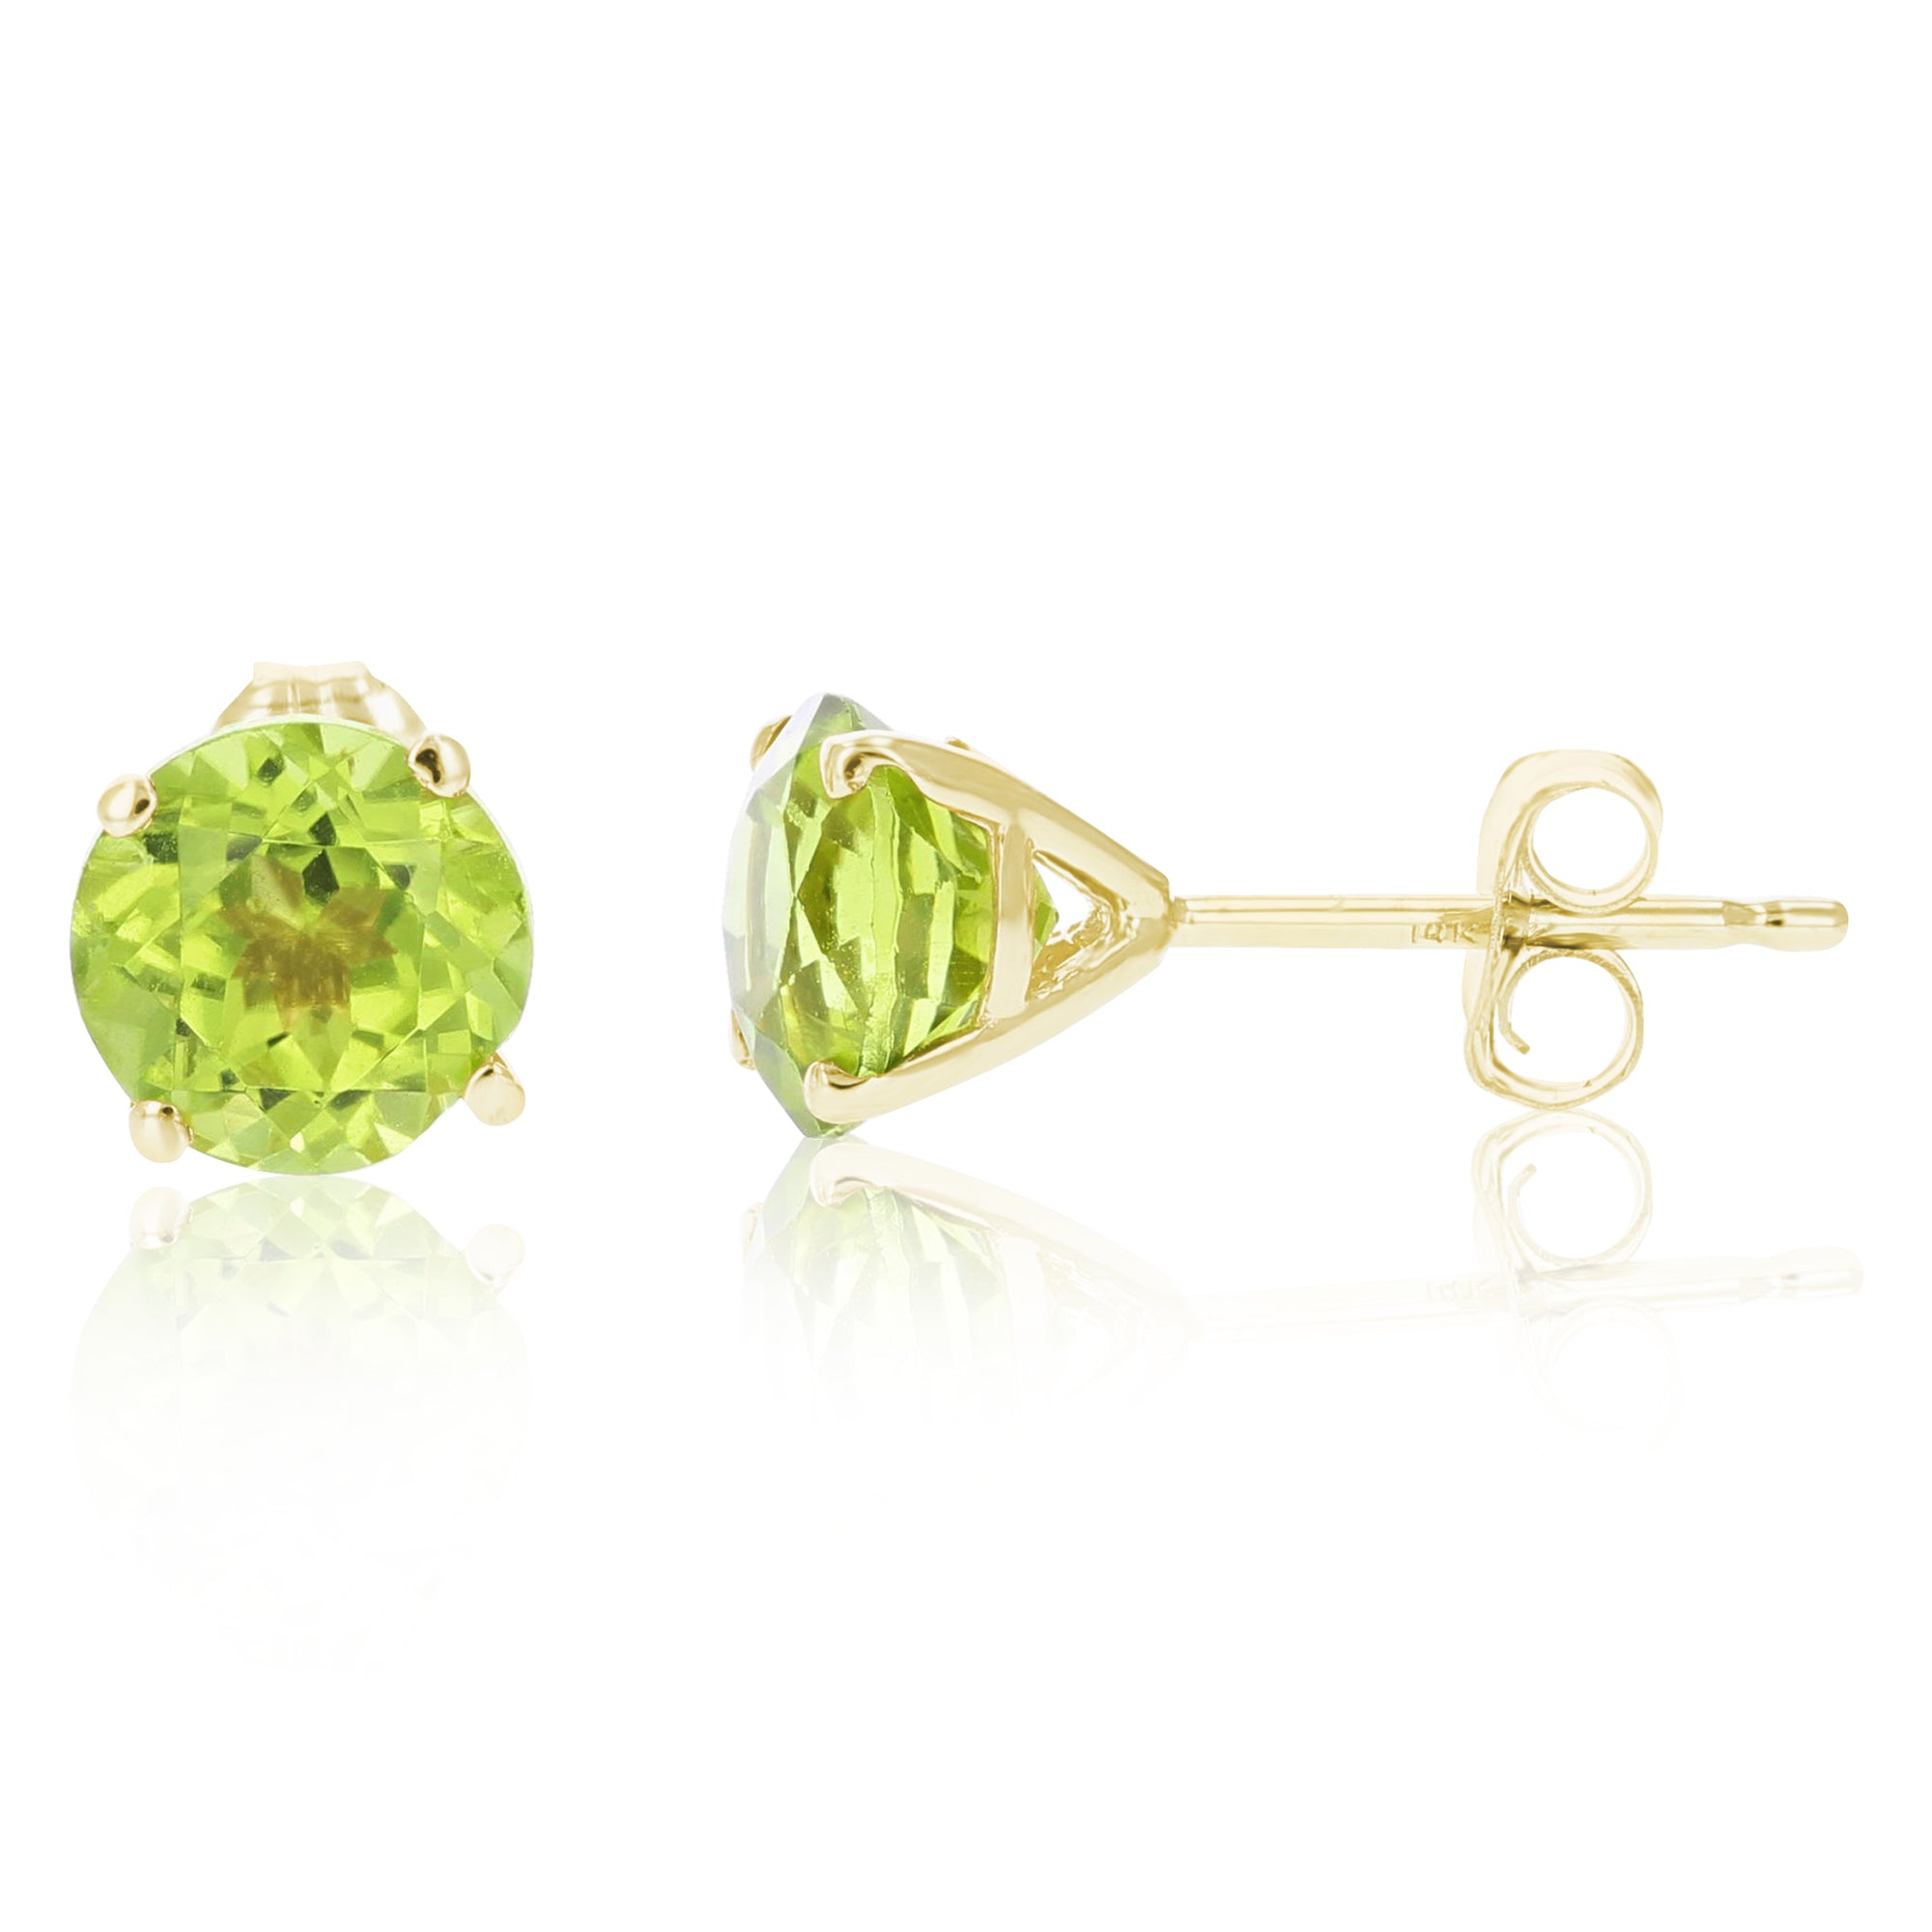 1.80 cttw 6 MM Peridot Stud Earrings 14K Gold Round Cut with Push Backs August Birthstone